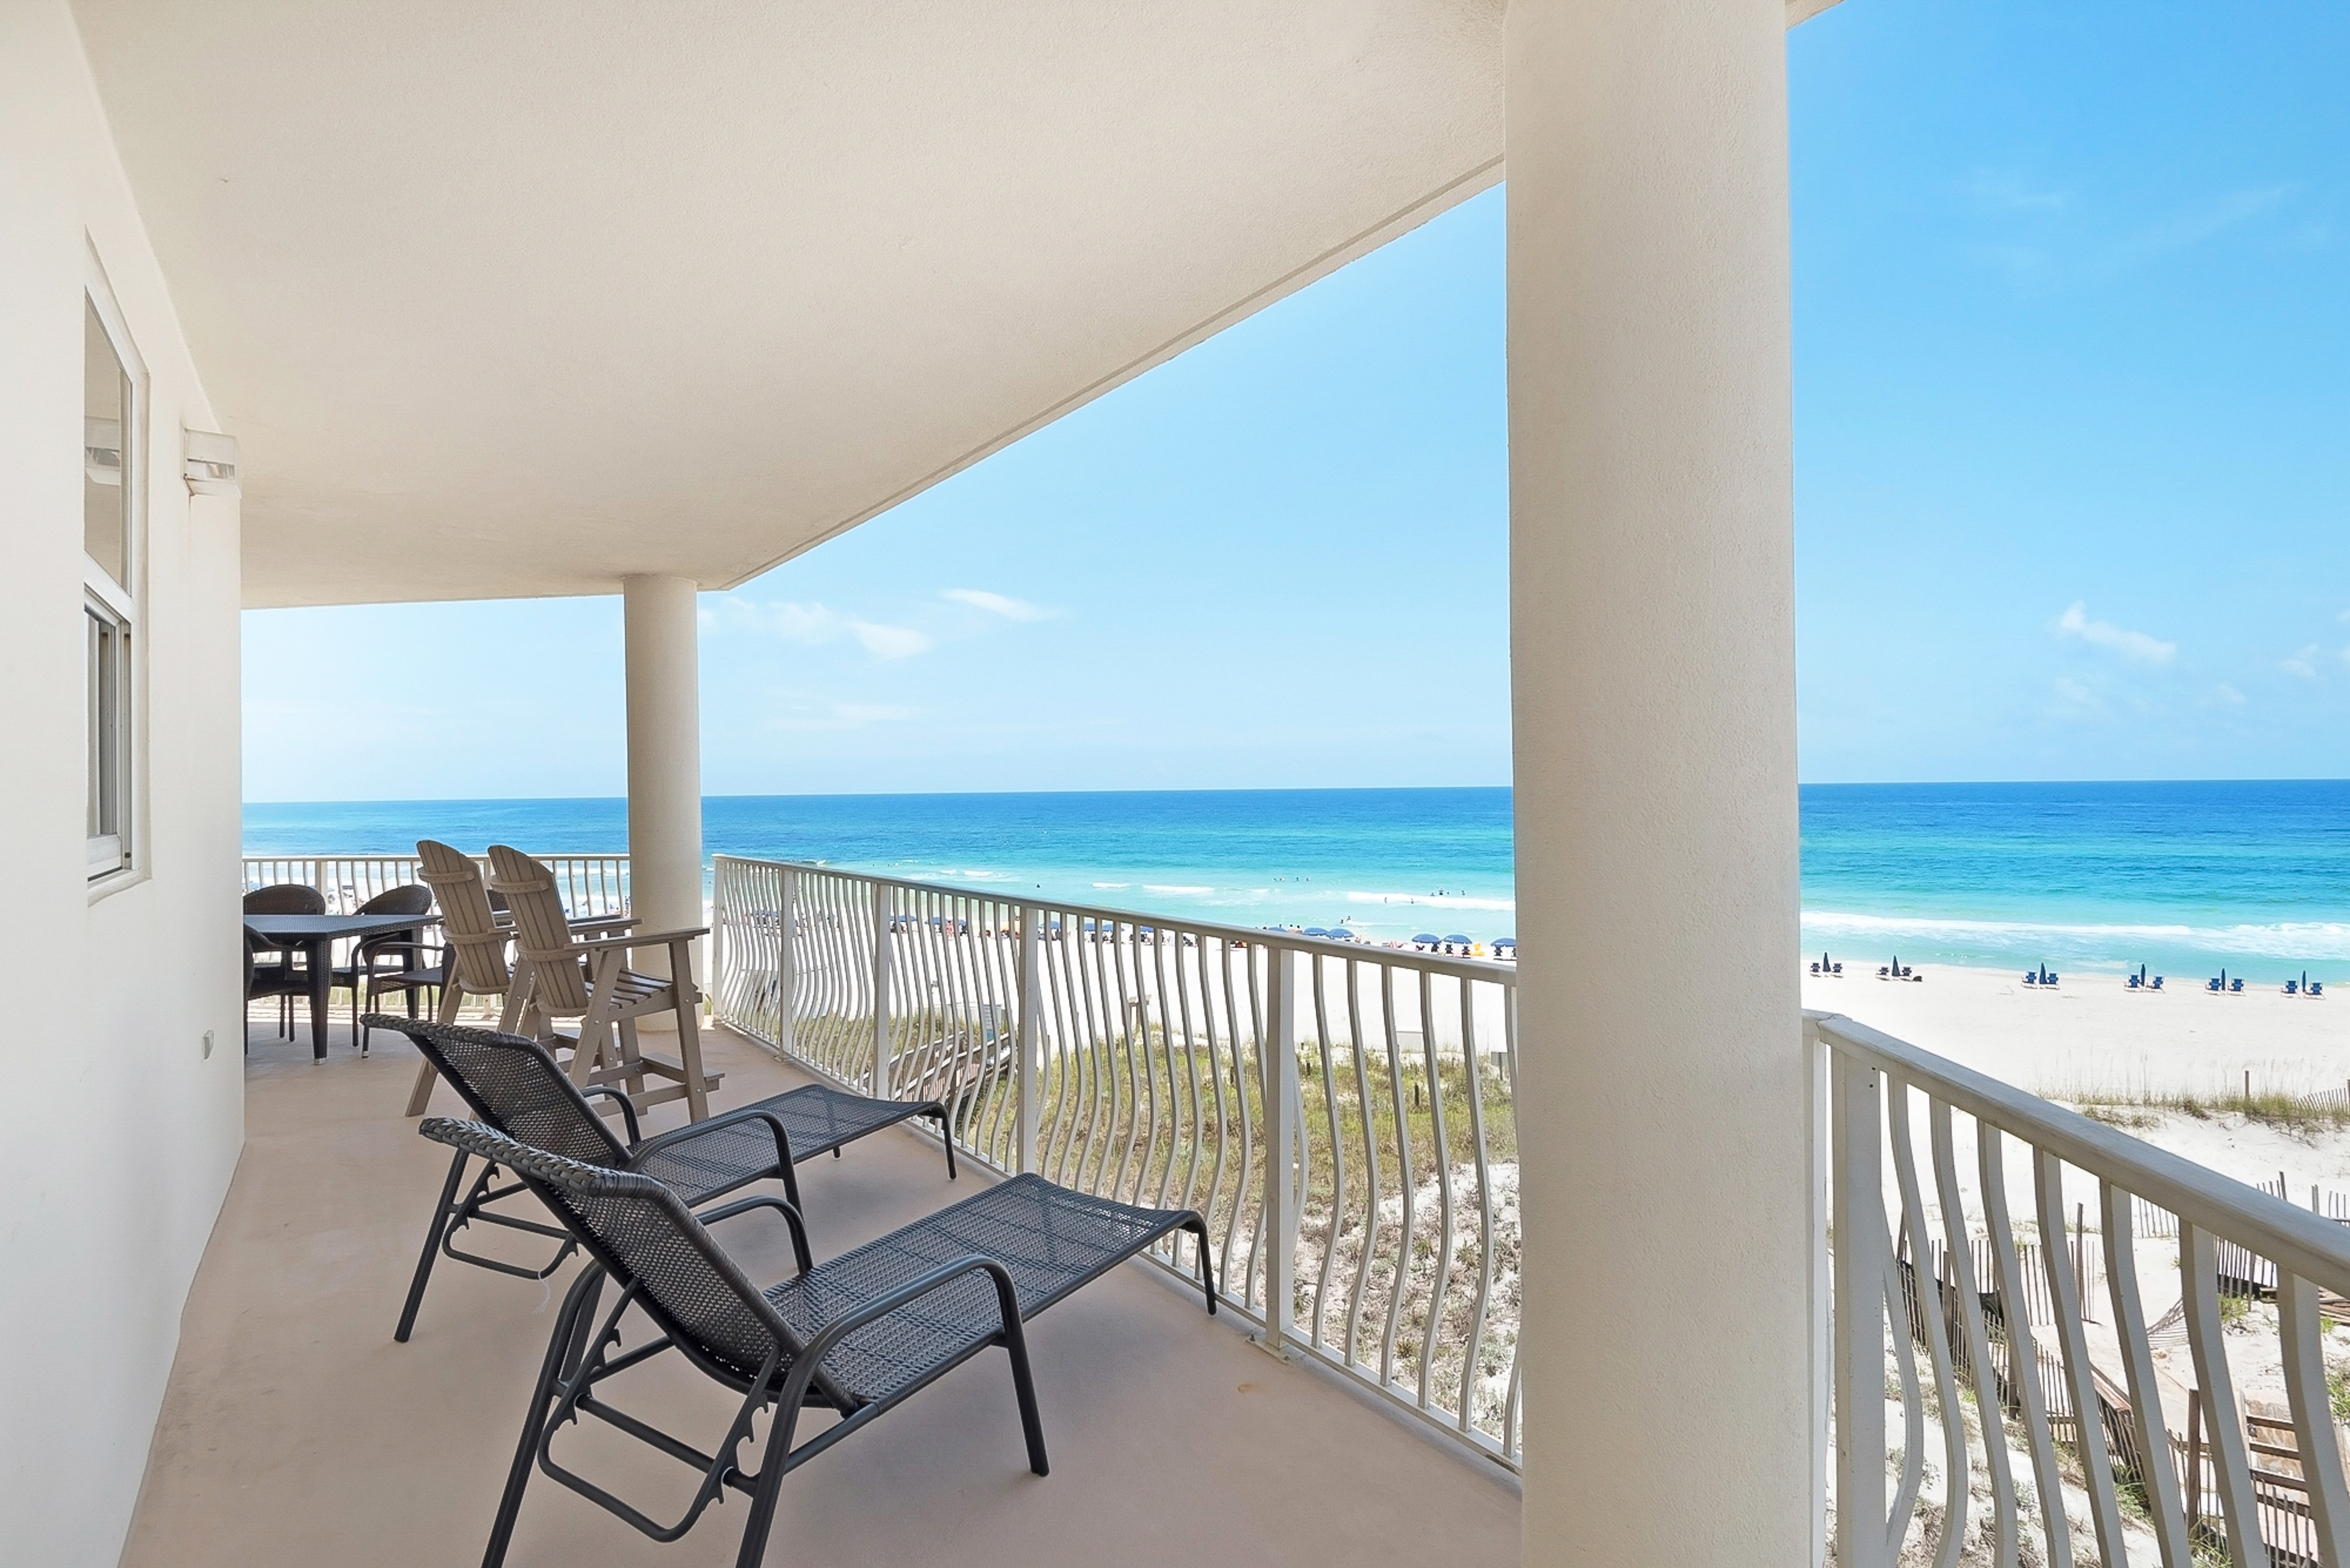 Dunes of Seagrove B305 Condo rental in Dunes of Seagrove in Highway 30-A Florida - #3